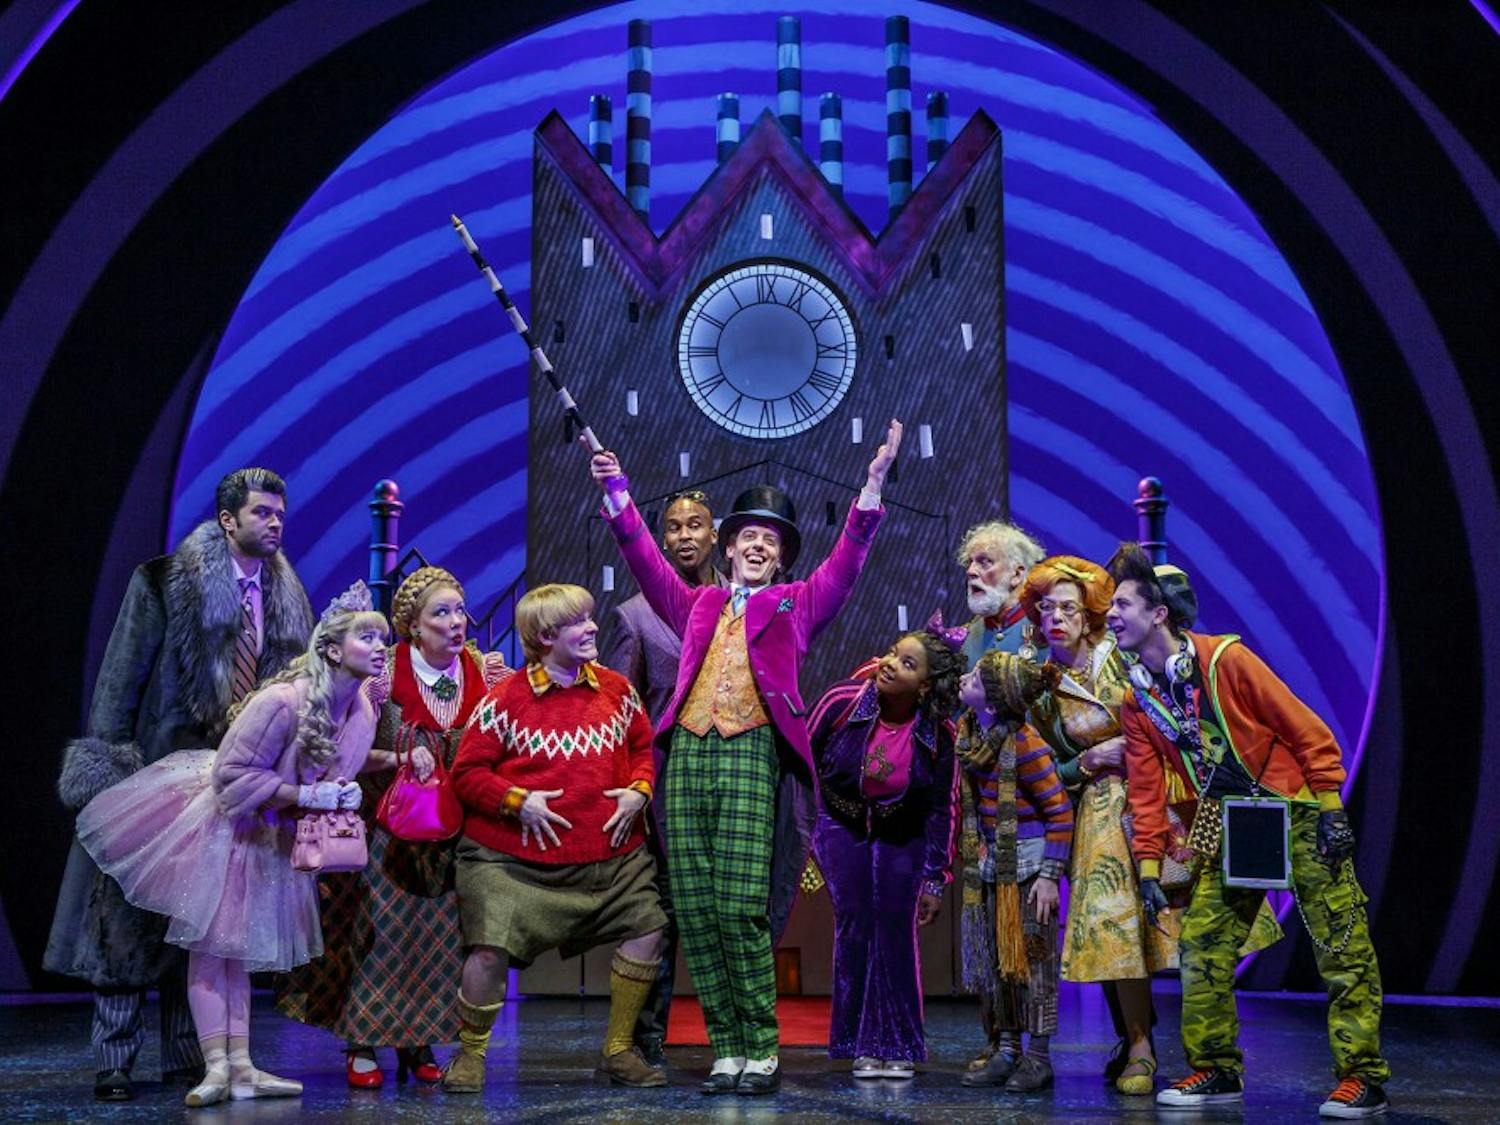 The traveling cast of “Charlie and the Chocolate Factory” has taken over Shea’s theater with their new musical adaptation. The production has received a wave of praise from critics and audiences alike.&nbsp;